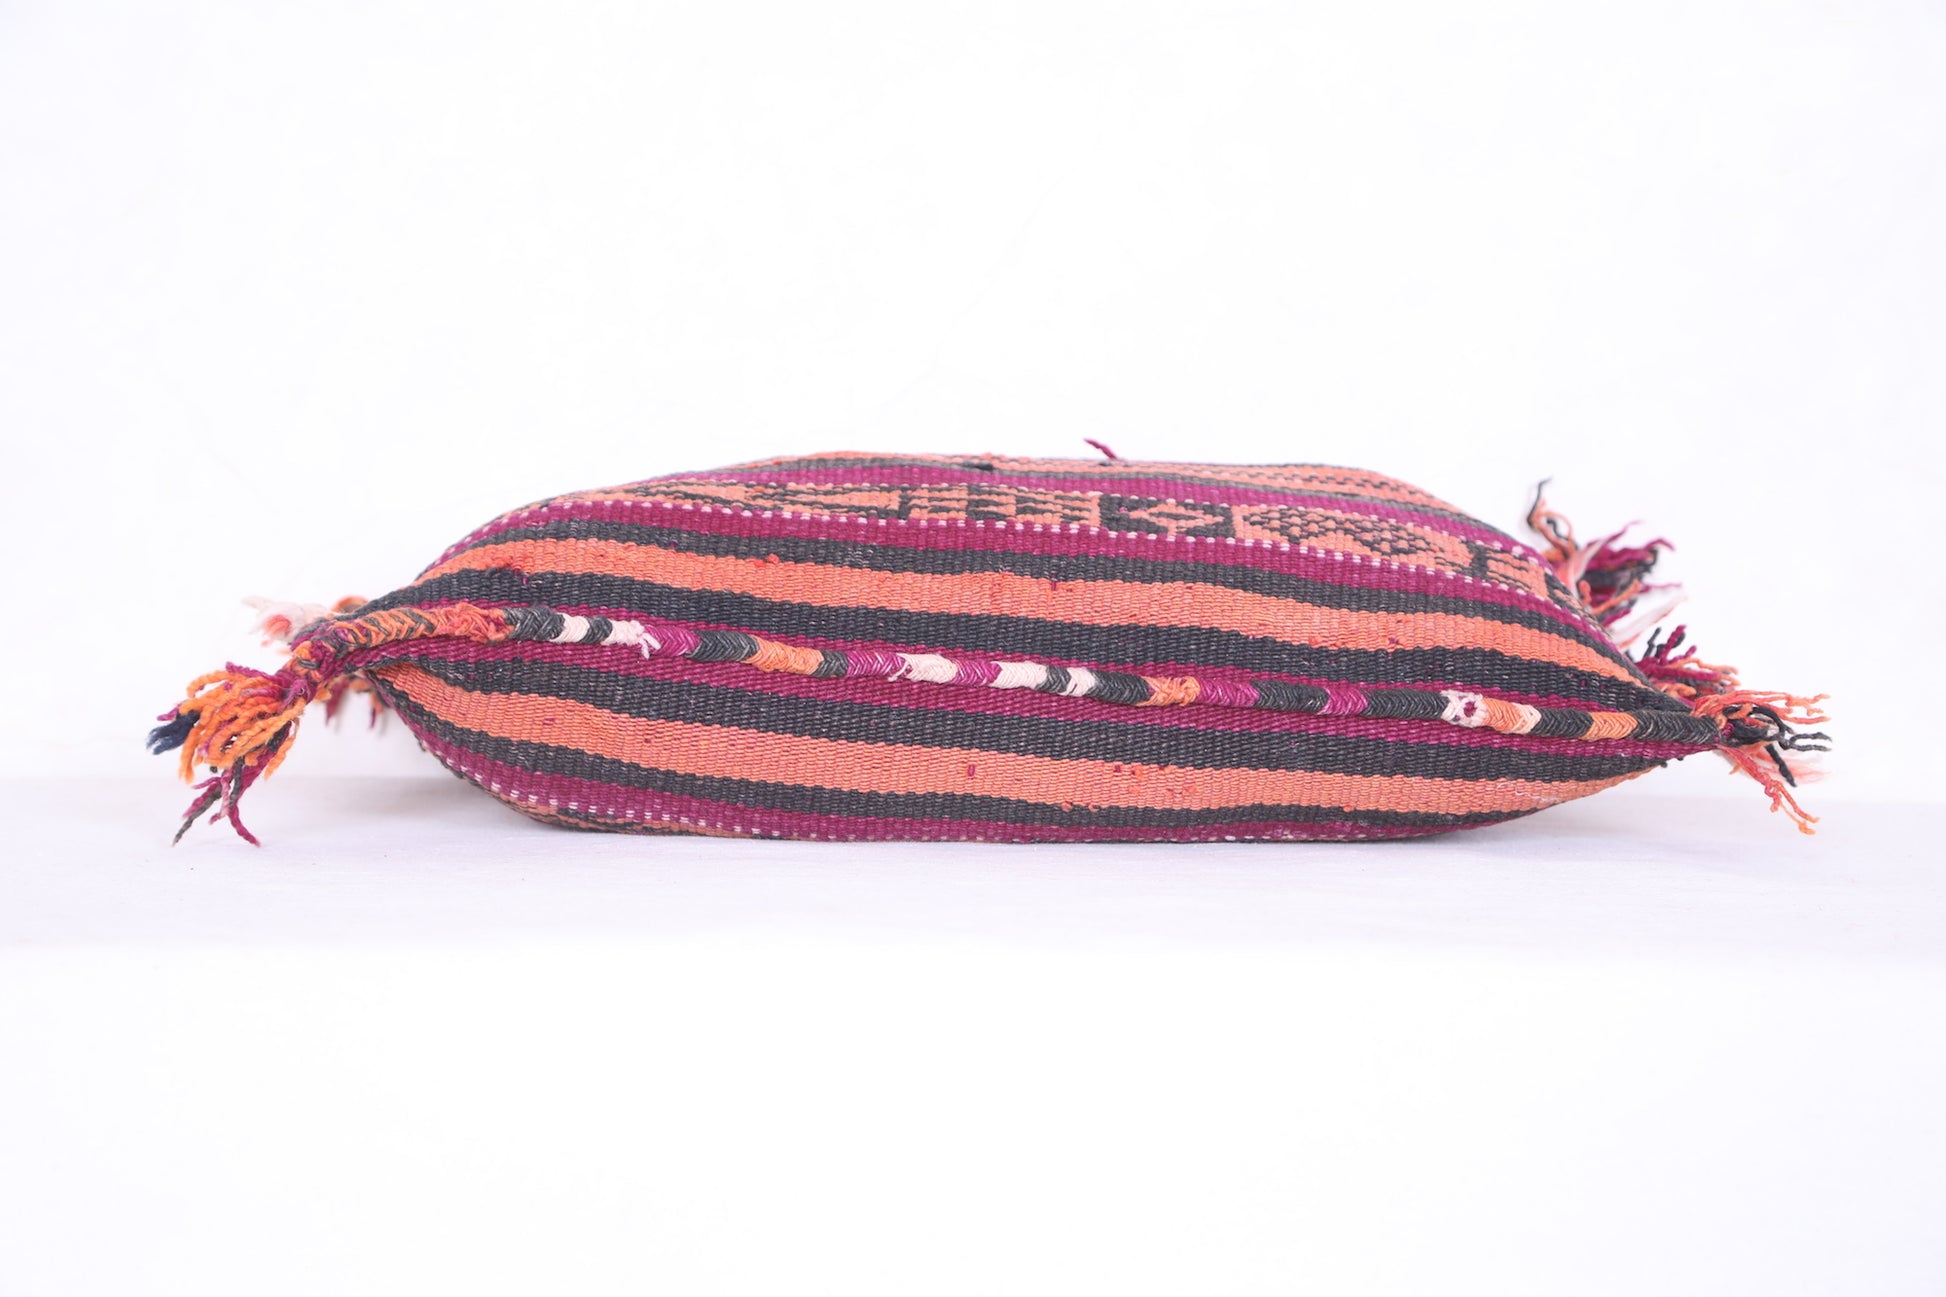 Moroccan handmade kilim pillow 15.7 INCHES X 20.4 INCHES